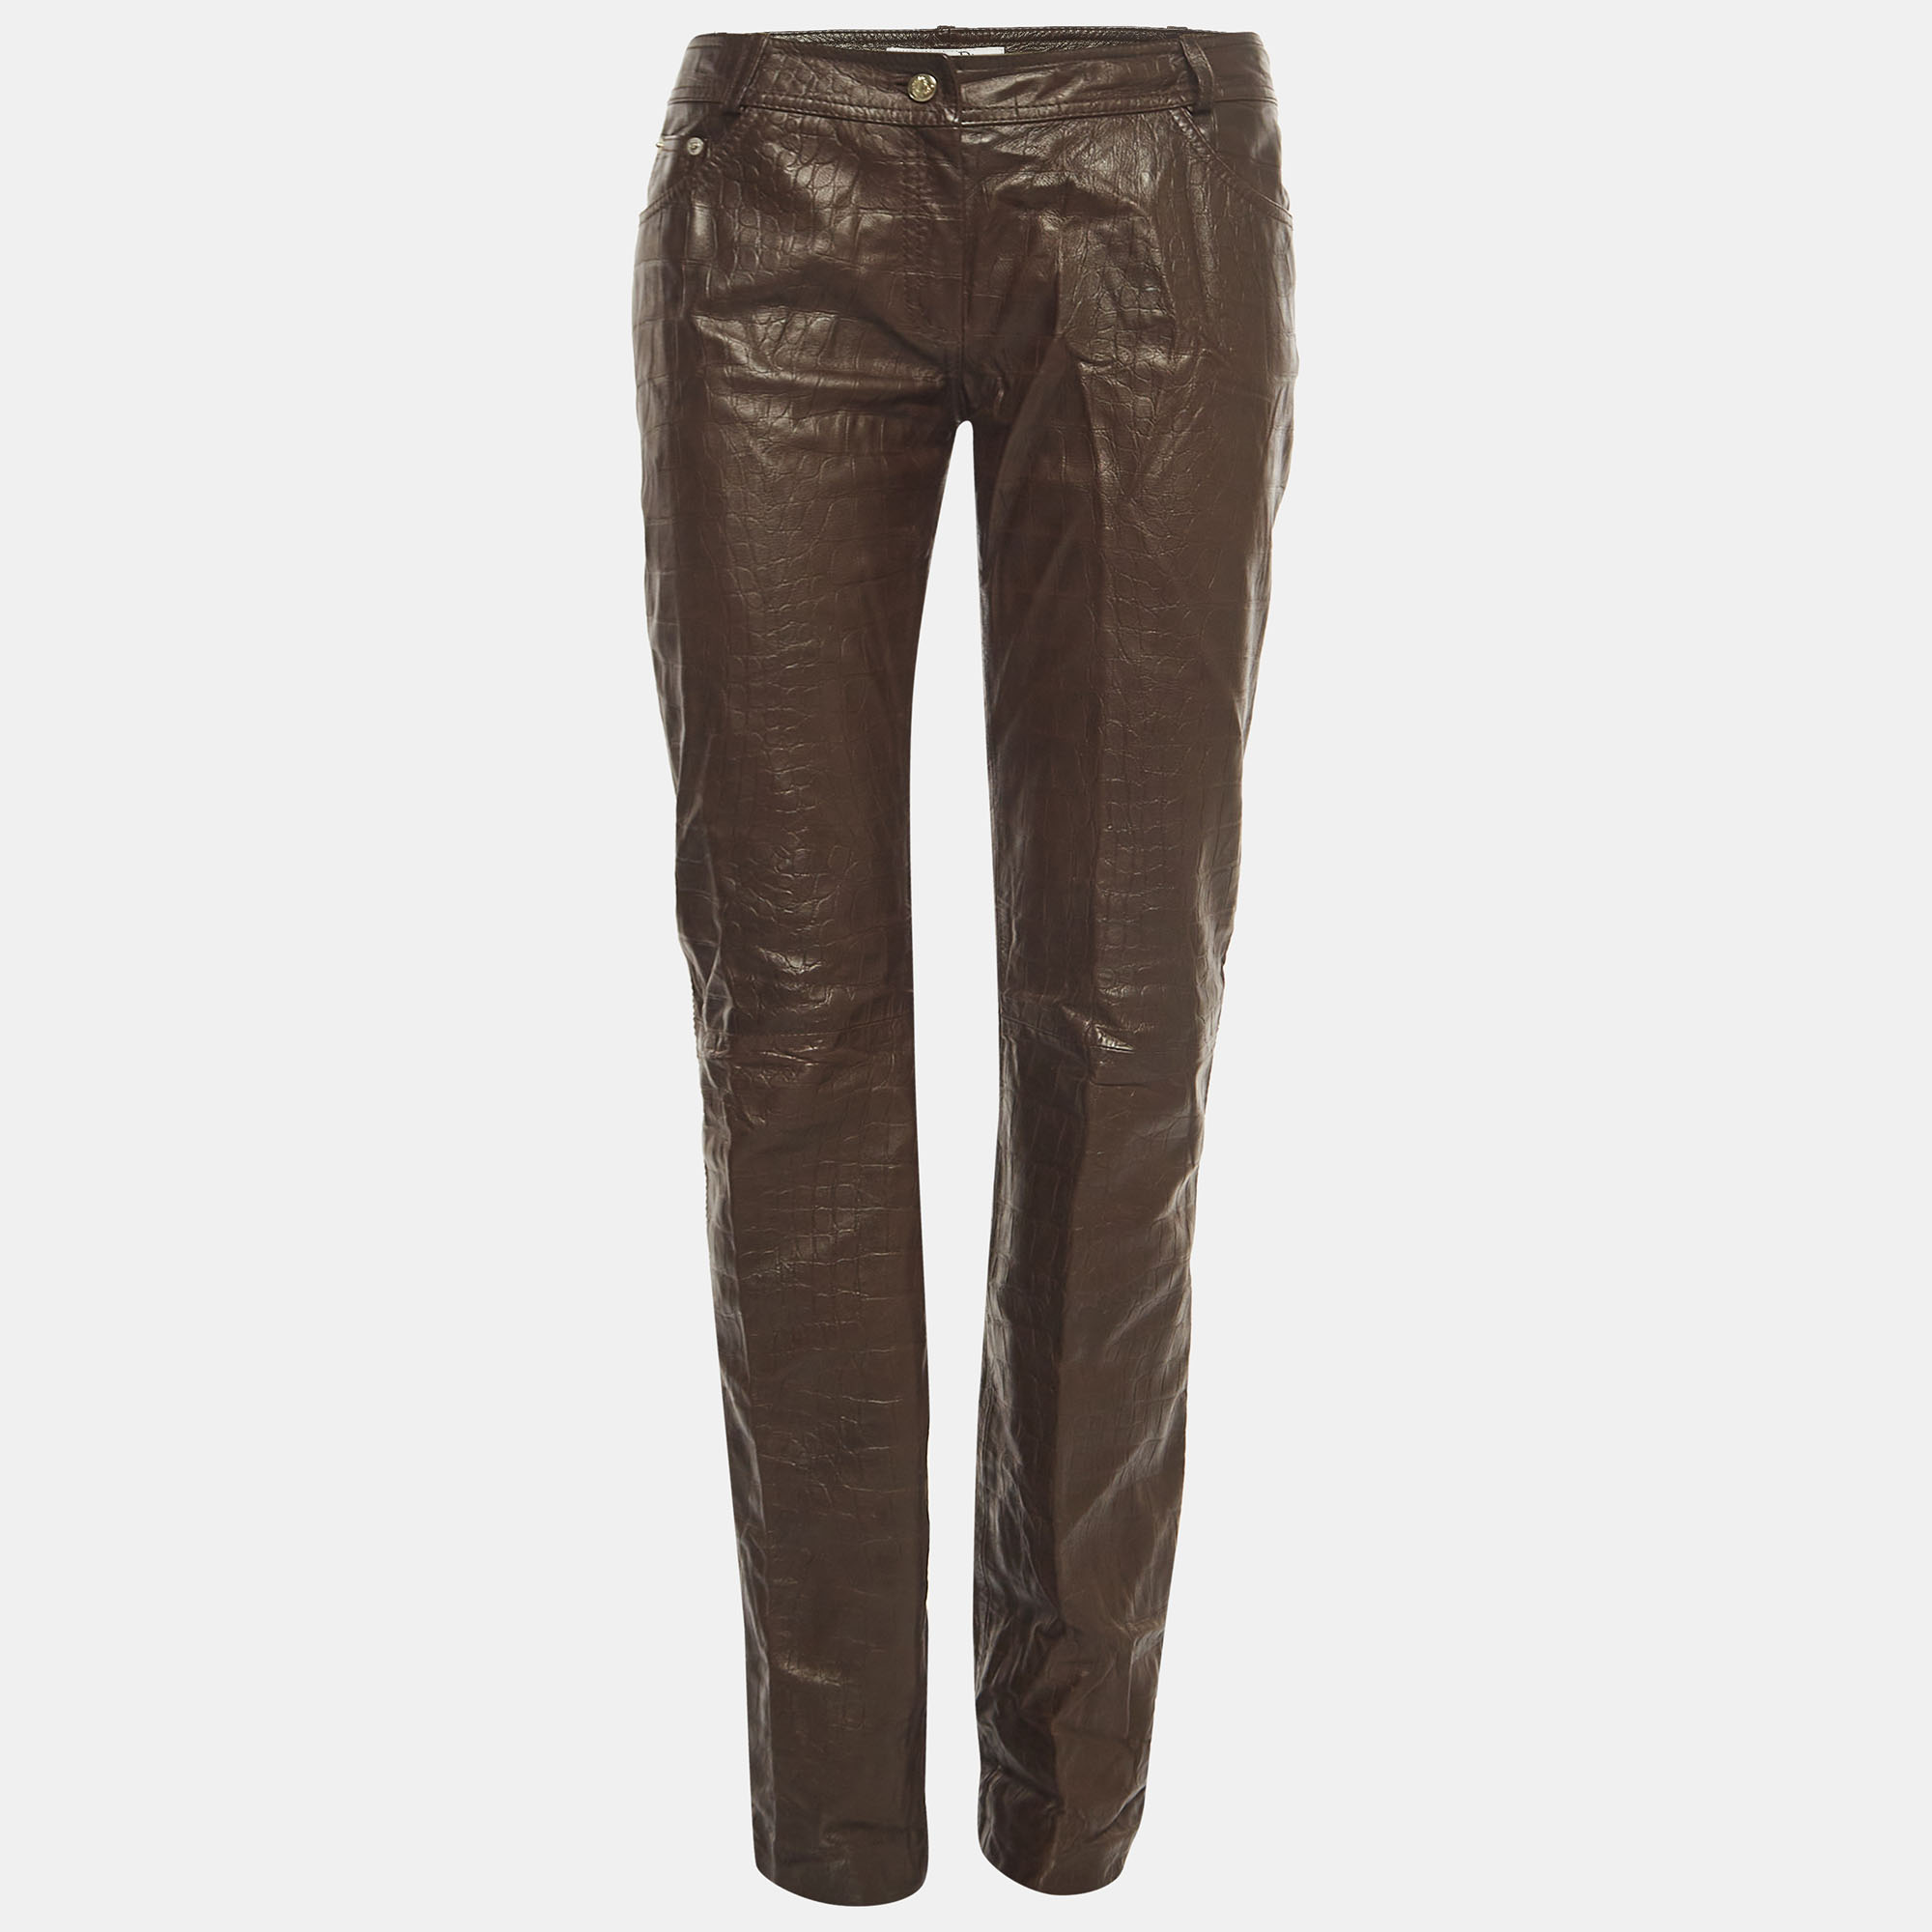 

Christian Dior Boutique Brown Textured Leather Straight Leg Pants